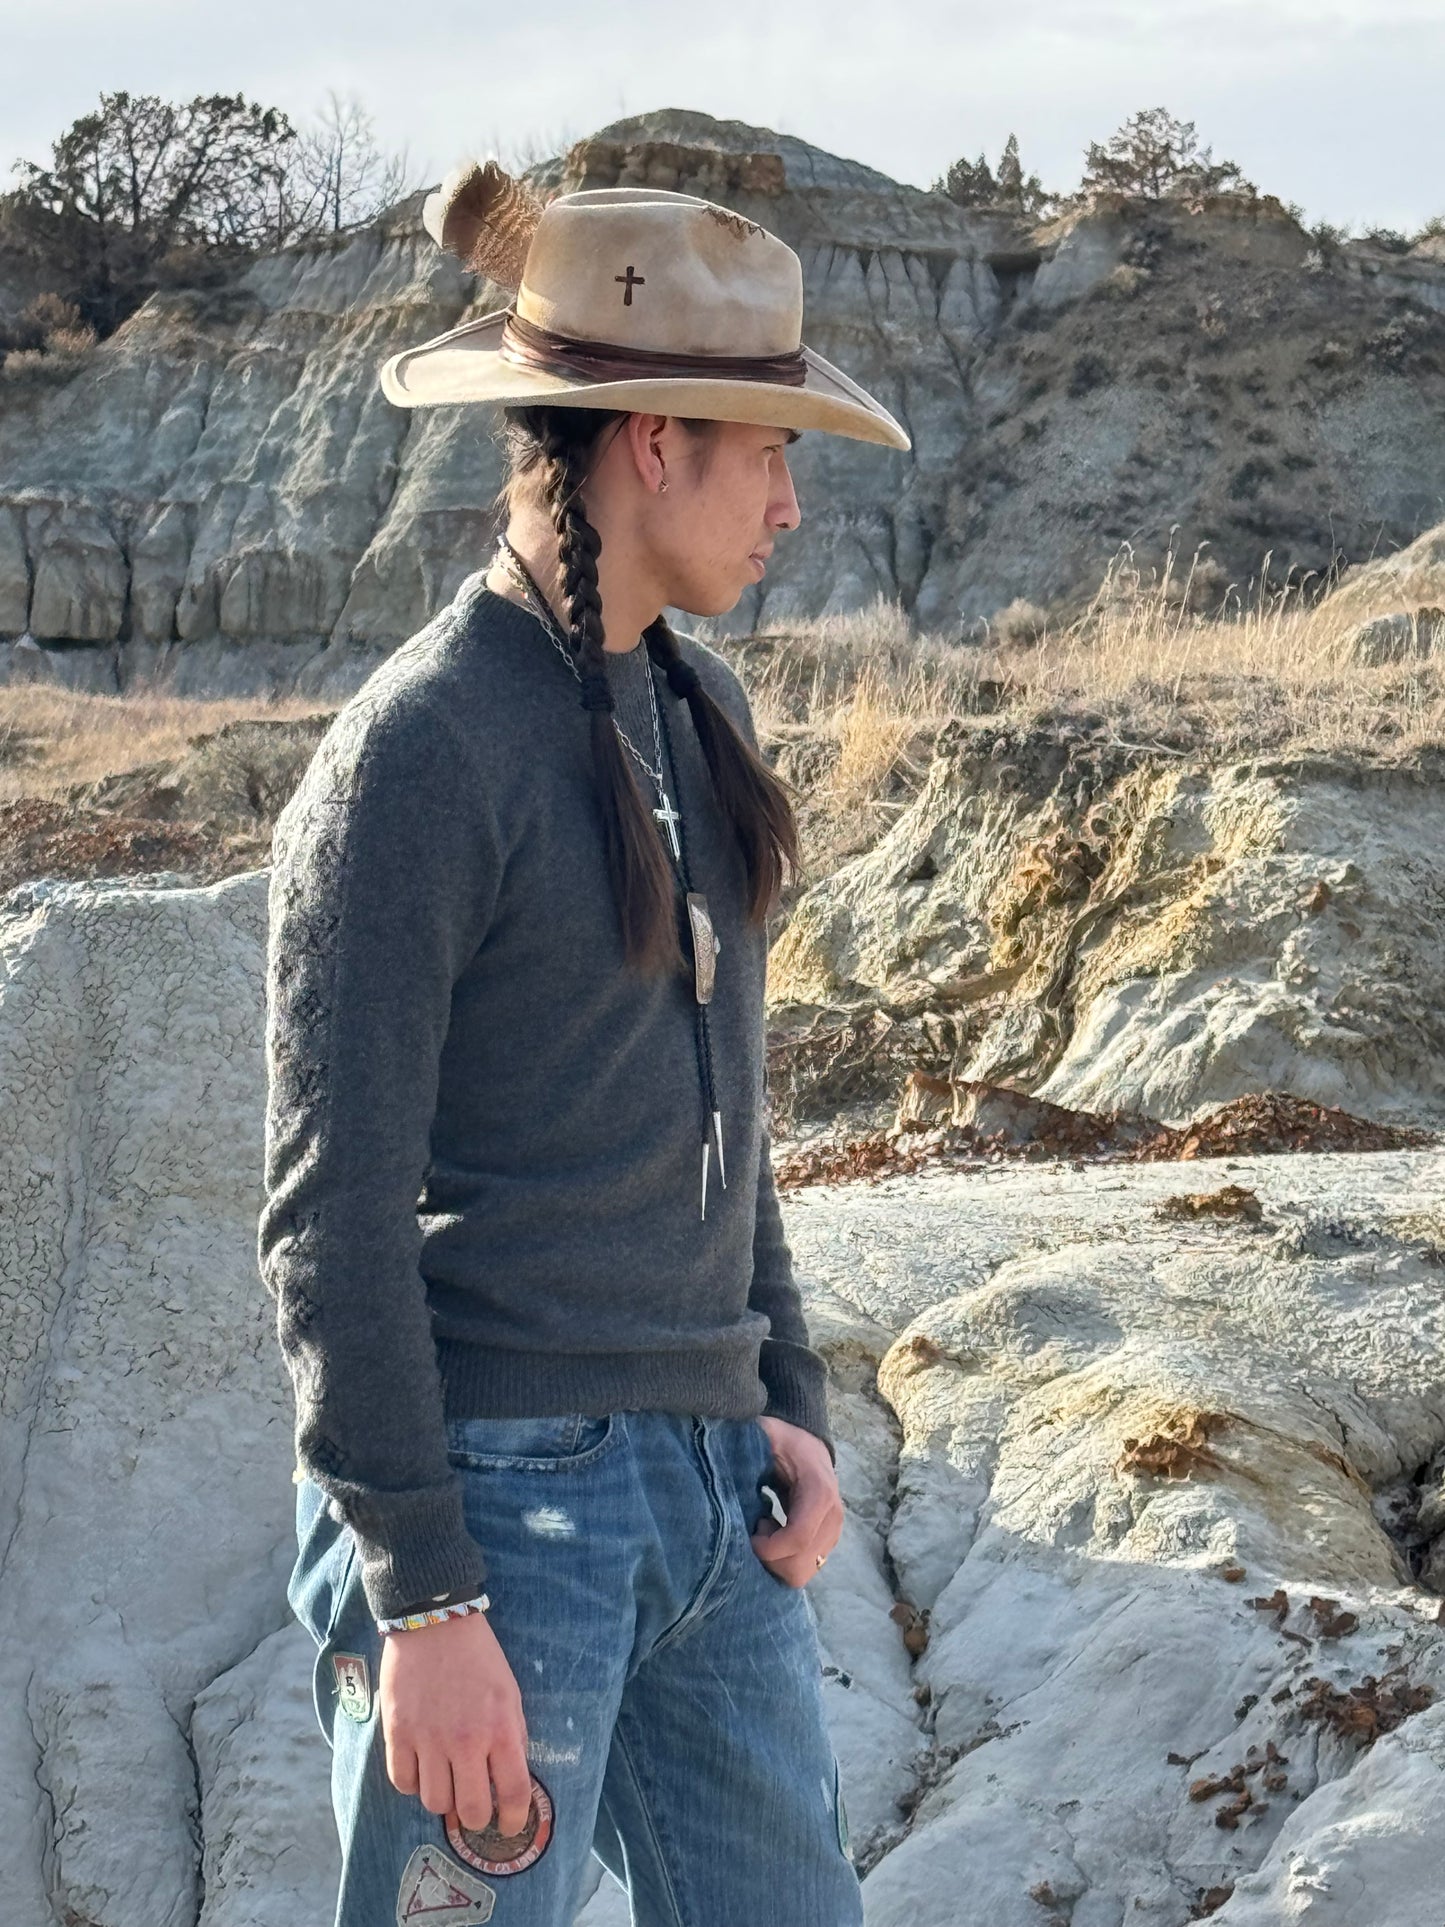 The Rancher Hat